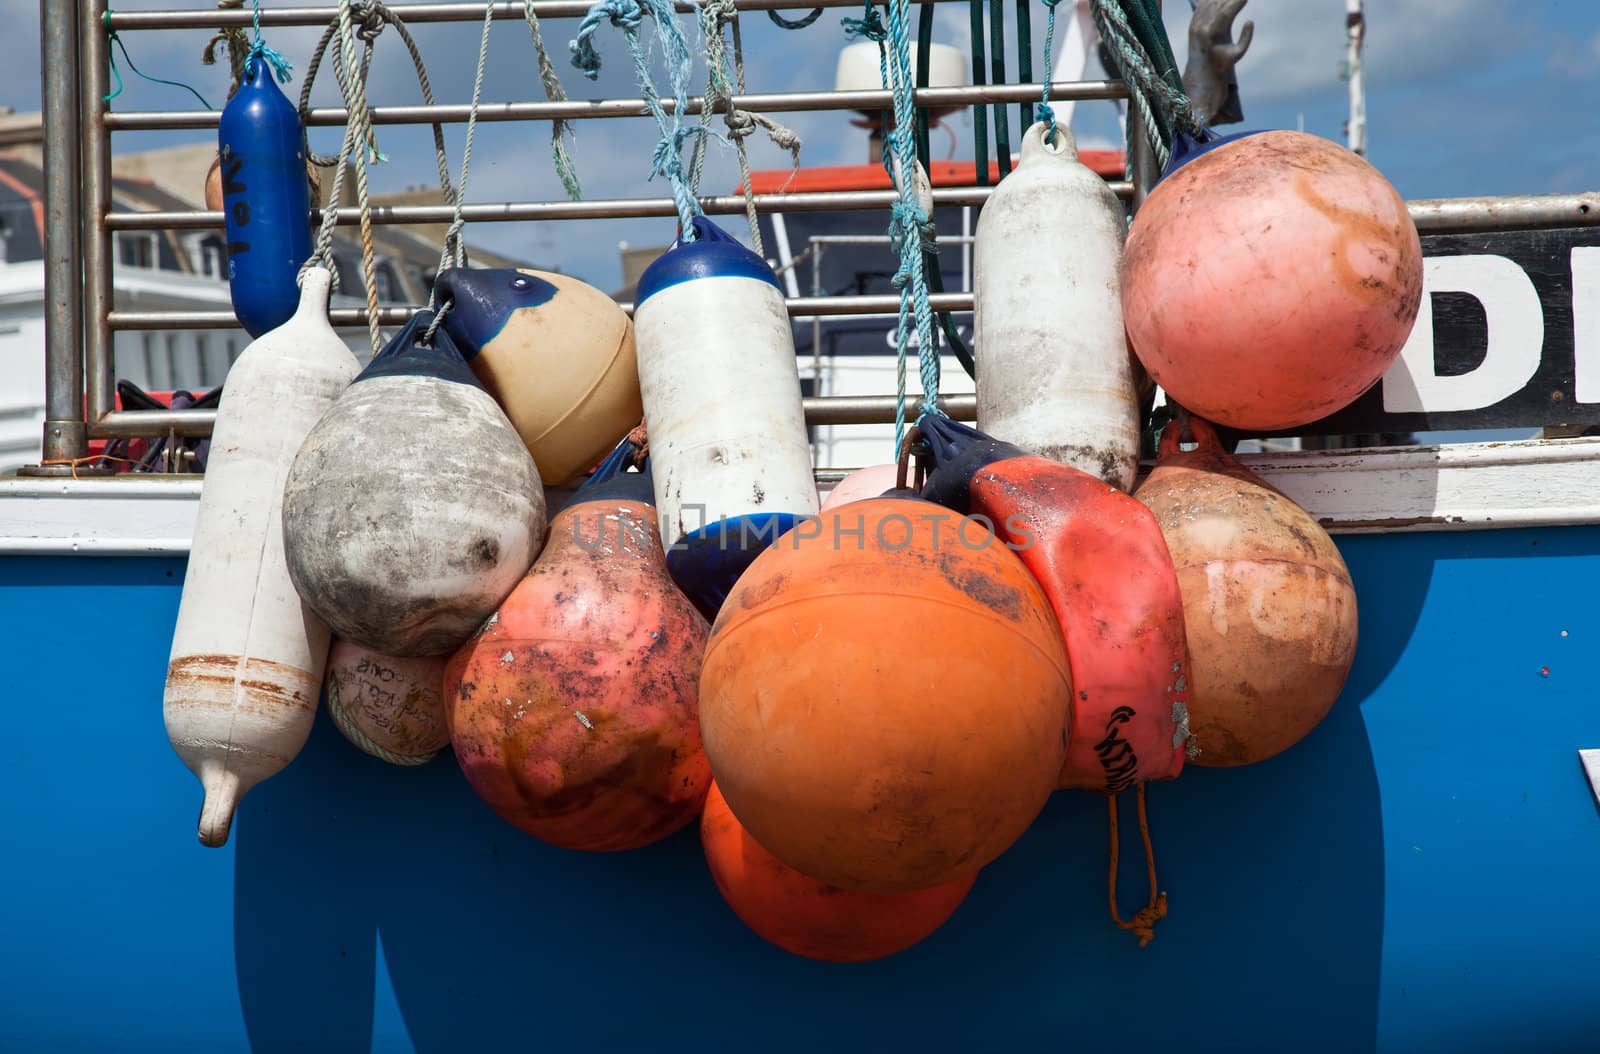 Group of colored plastic floats on side of blue boat used as bumpers